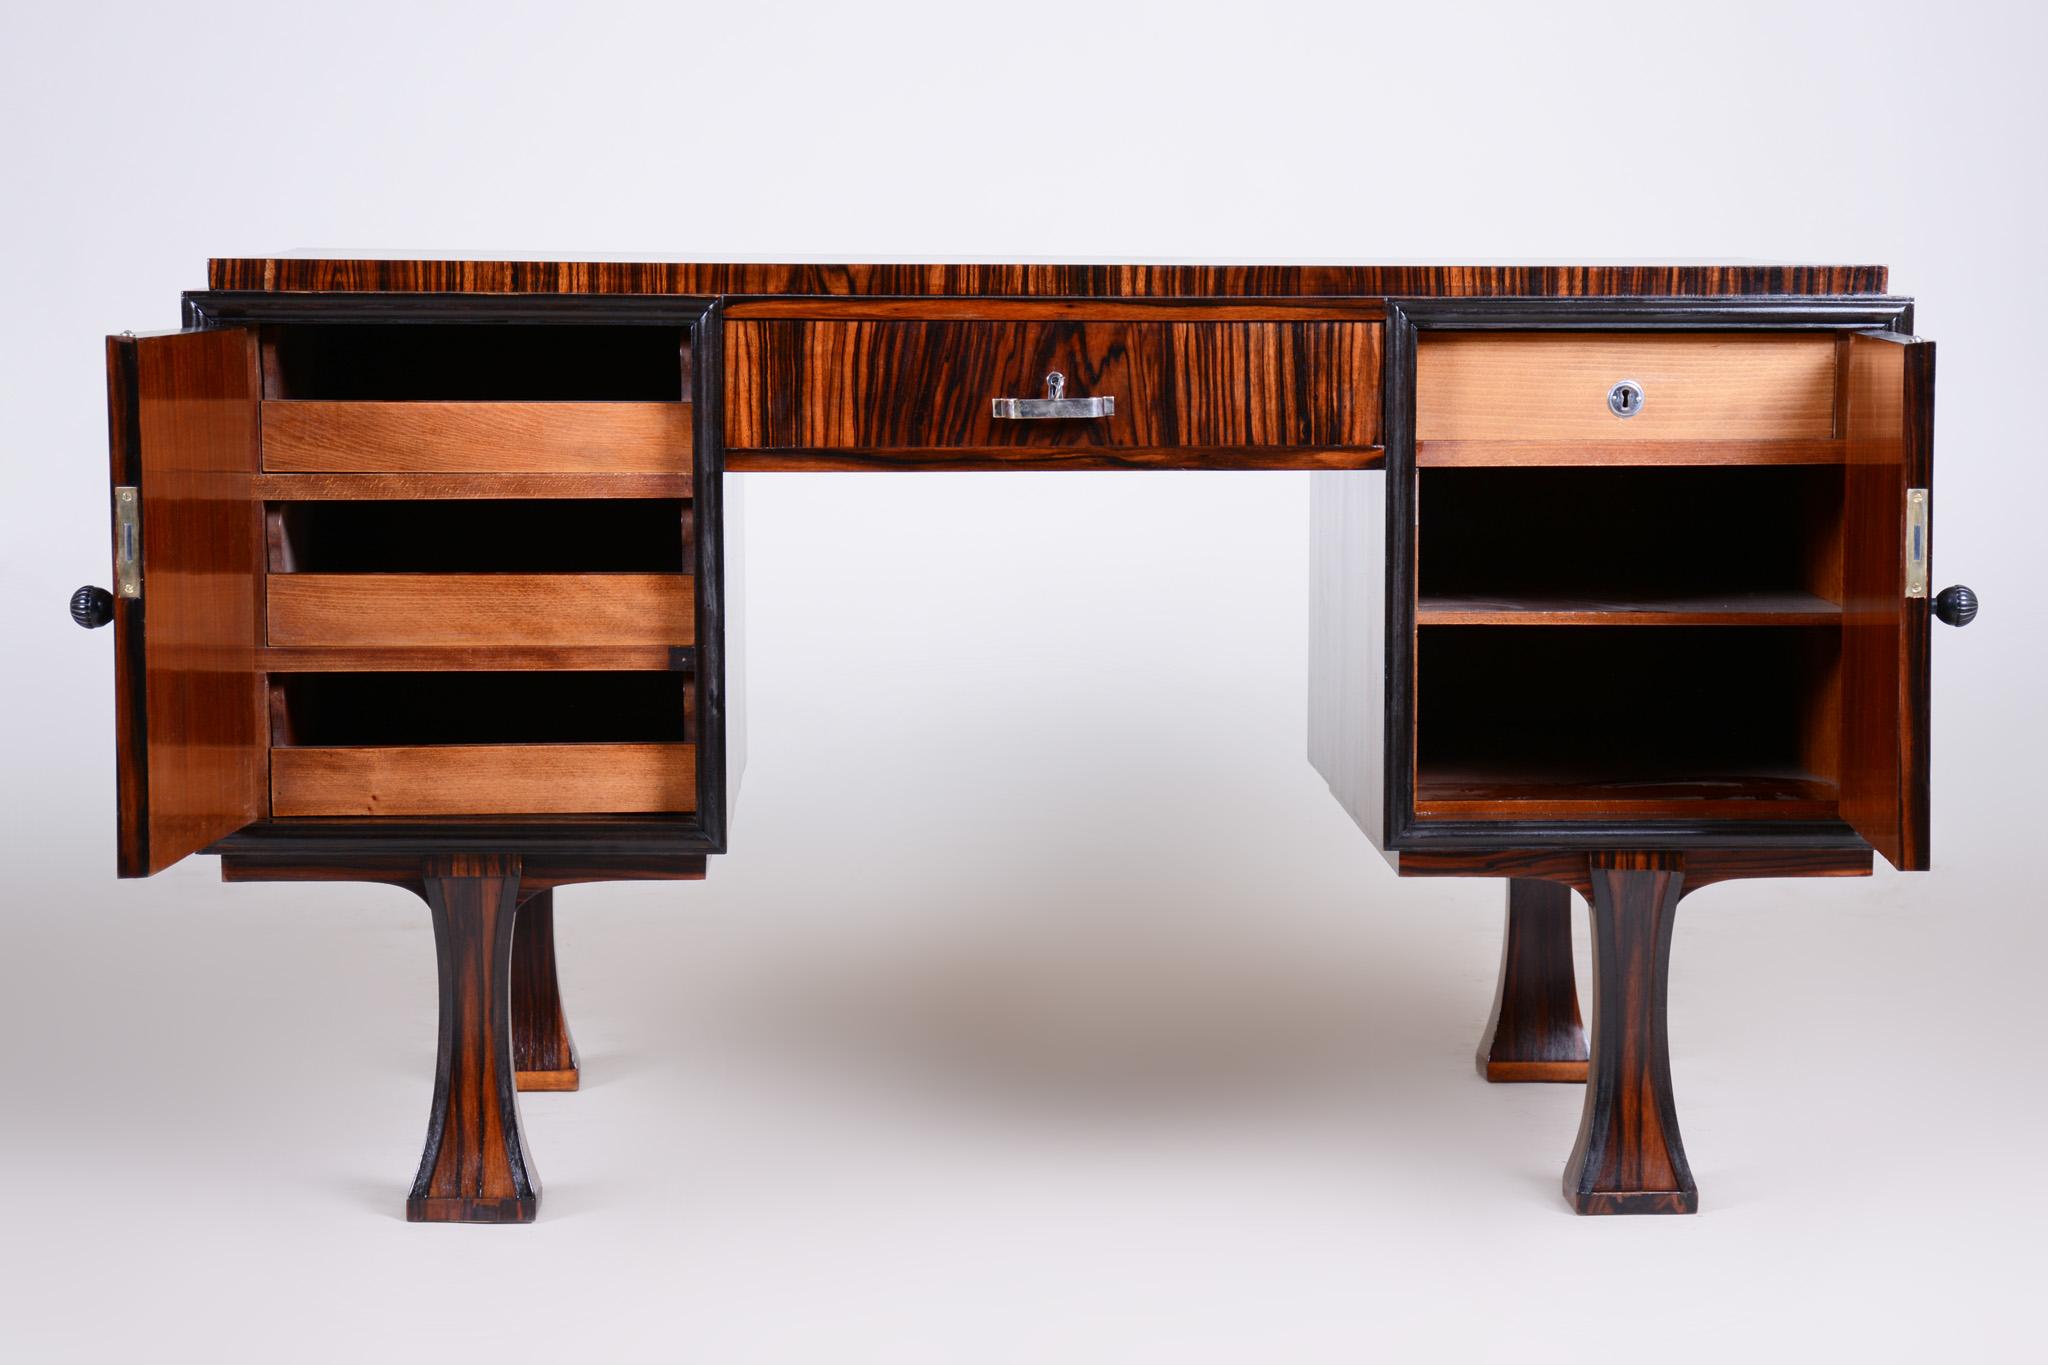 Early 20th Century French Art Deco Writing Desk Made in the 1920s, Restored Ebony